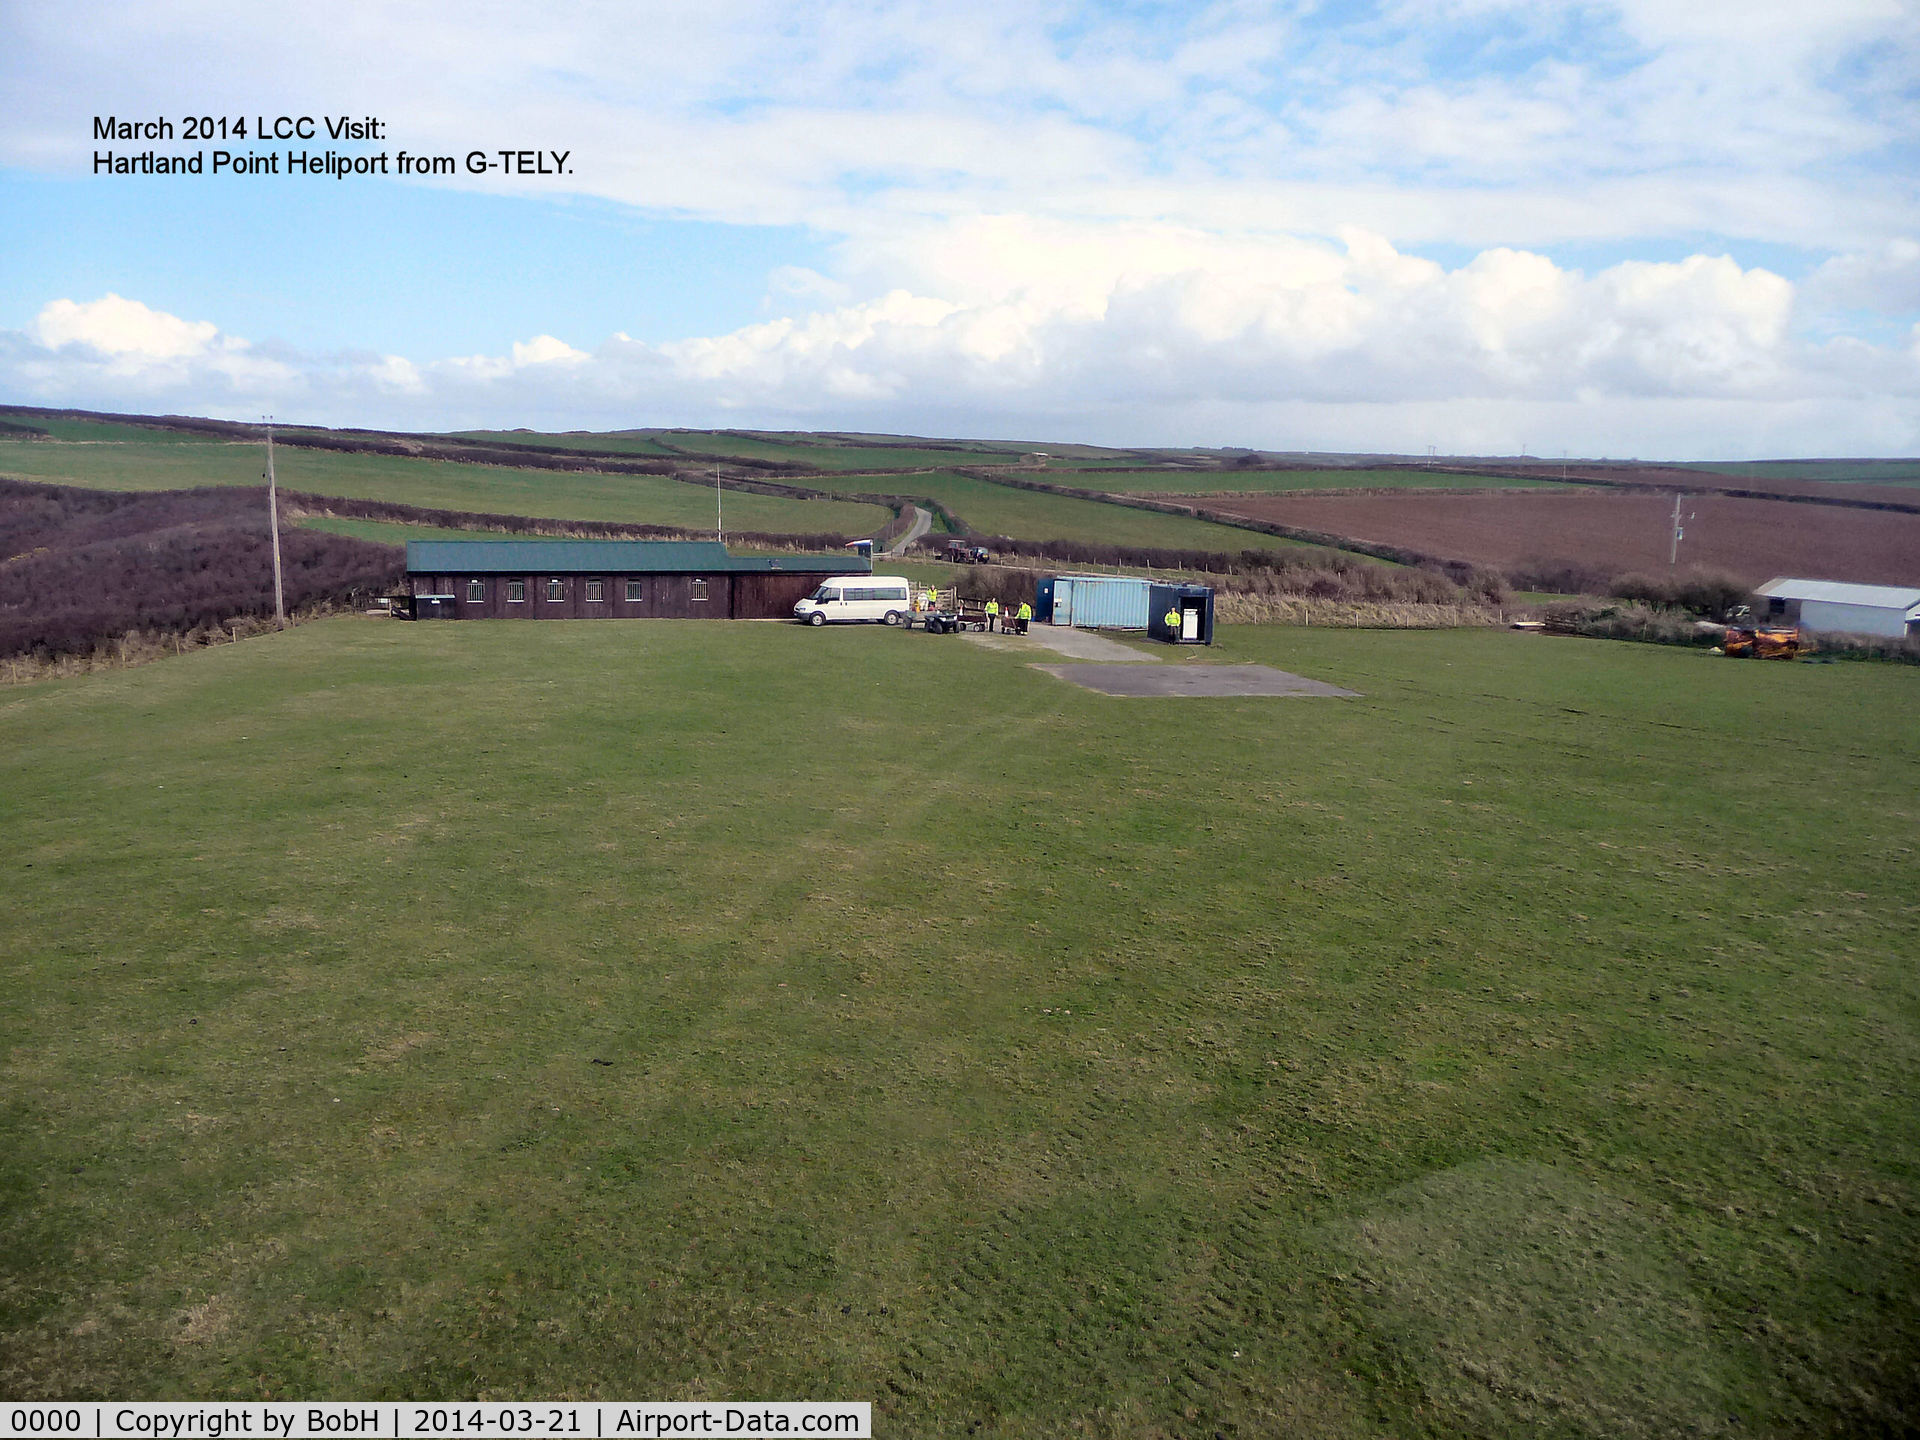 0000 Airport - Hartland Point Heliport in North Devon mainly serves Lundy Island some 11 miles distant